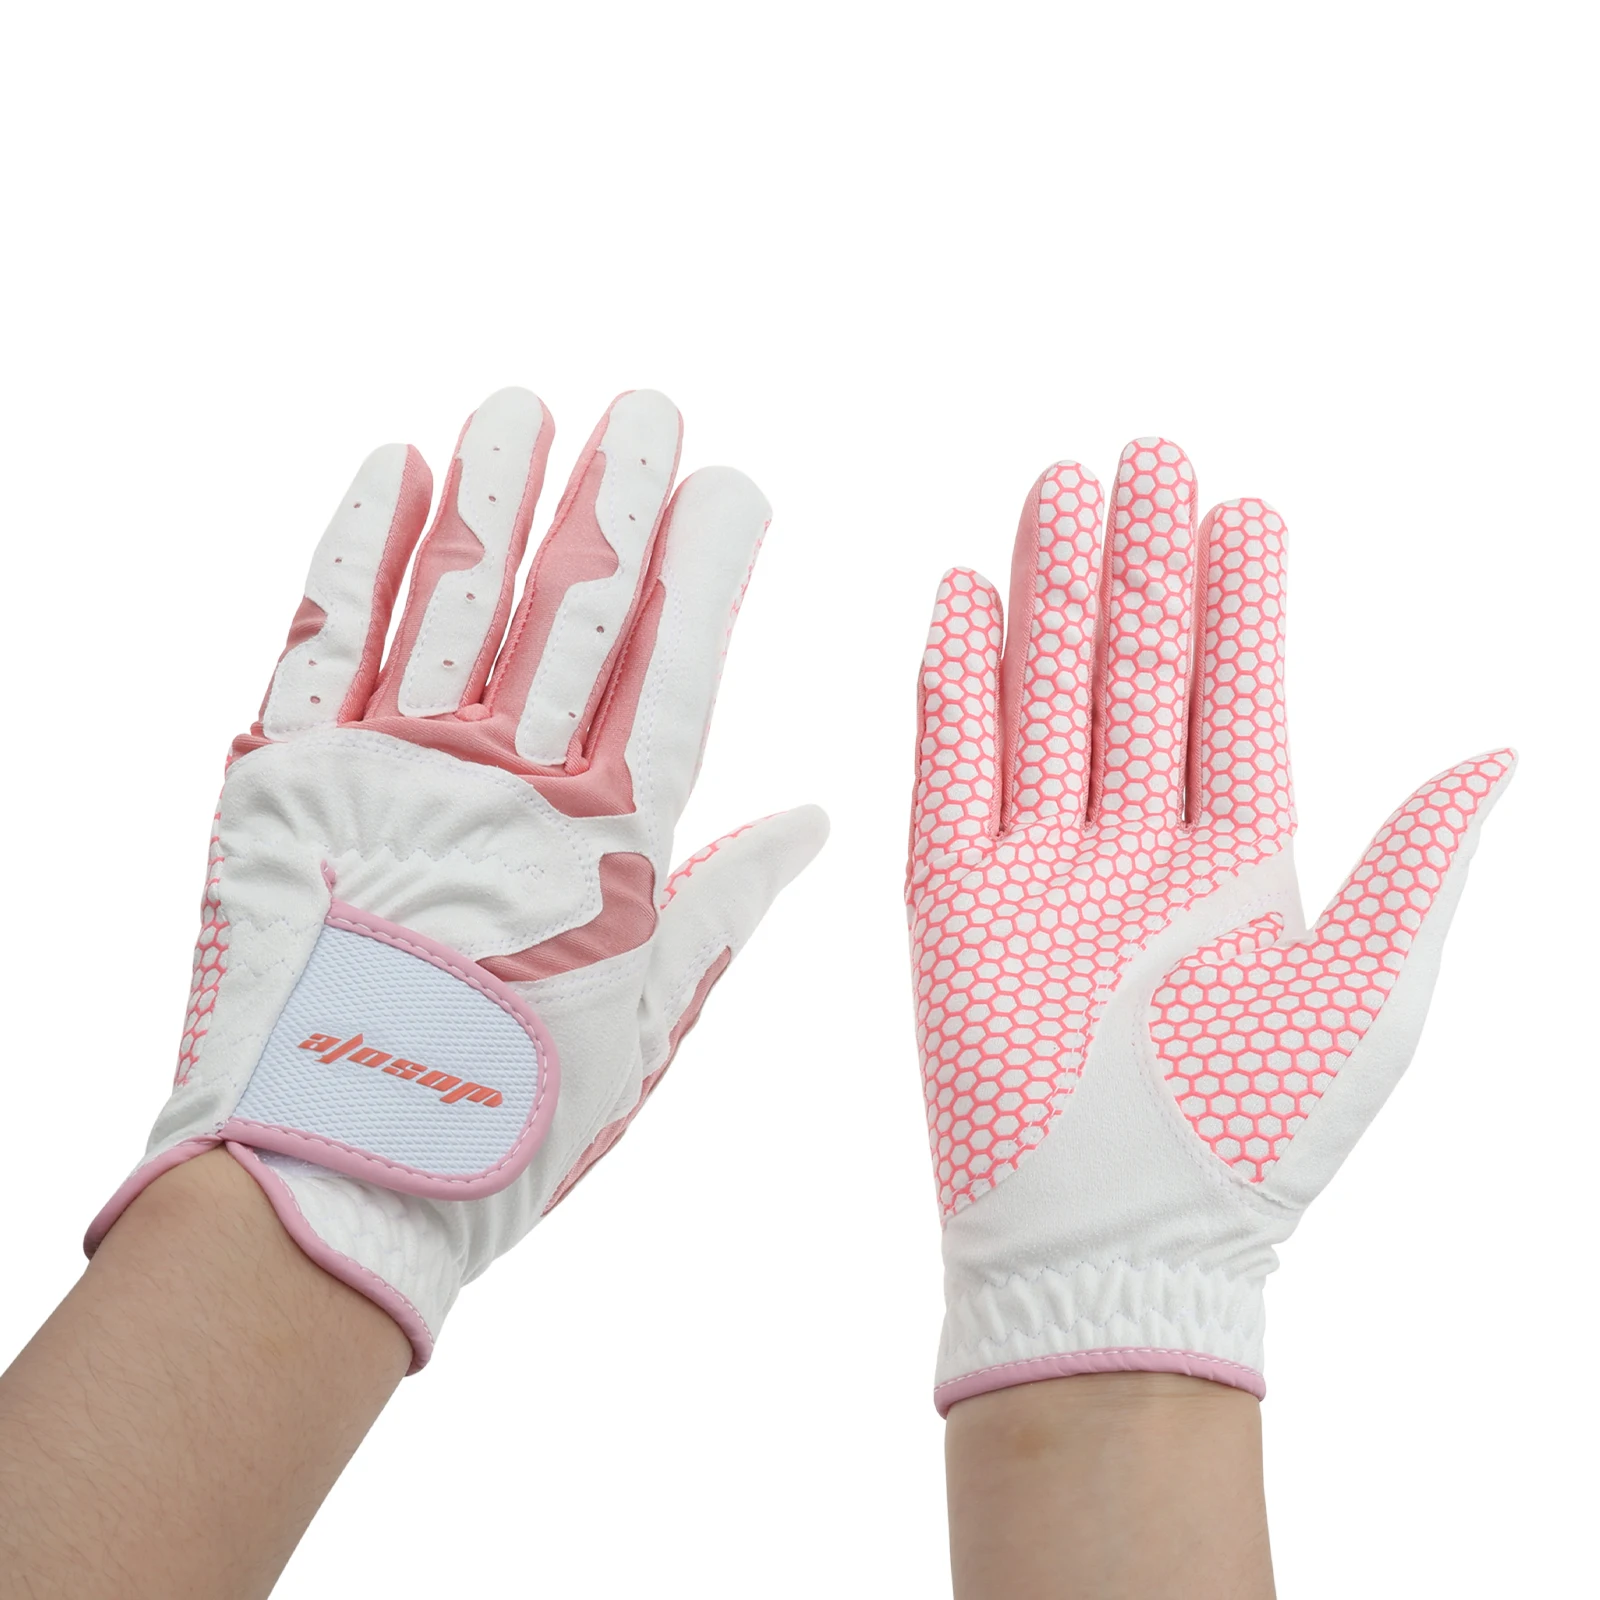 

1 Pair Golf Gloves Soft Durable Breathable for Women's Ladies Golf Glove 4 Sizes Golf Sport Practice Accessory